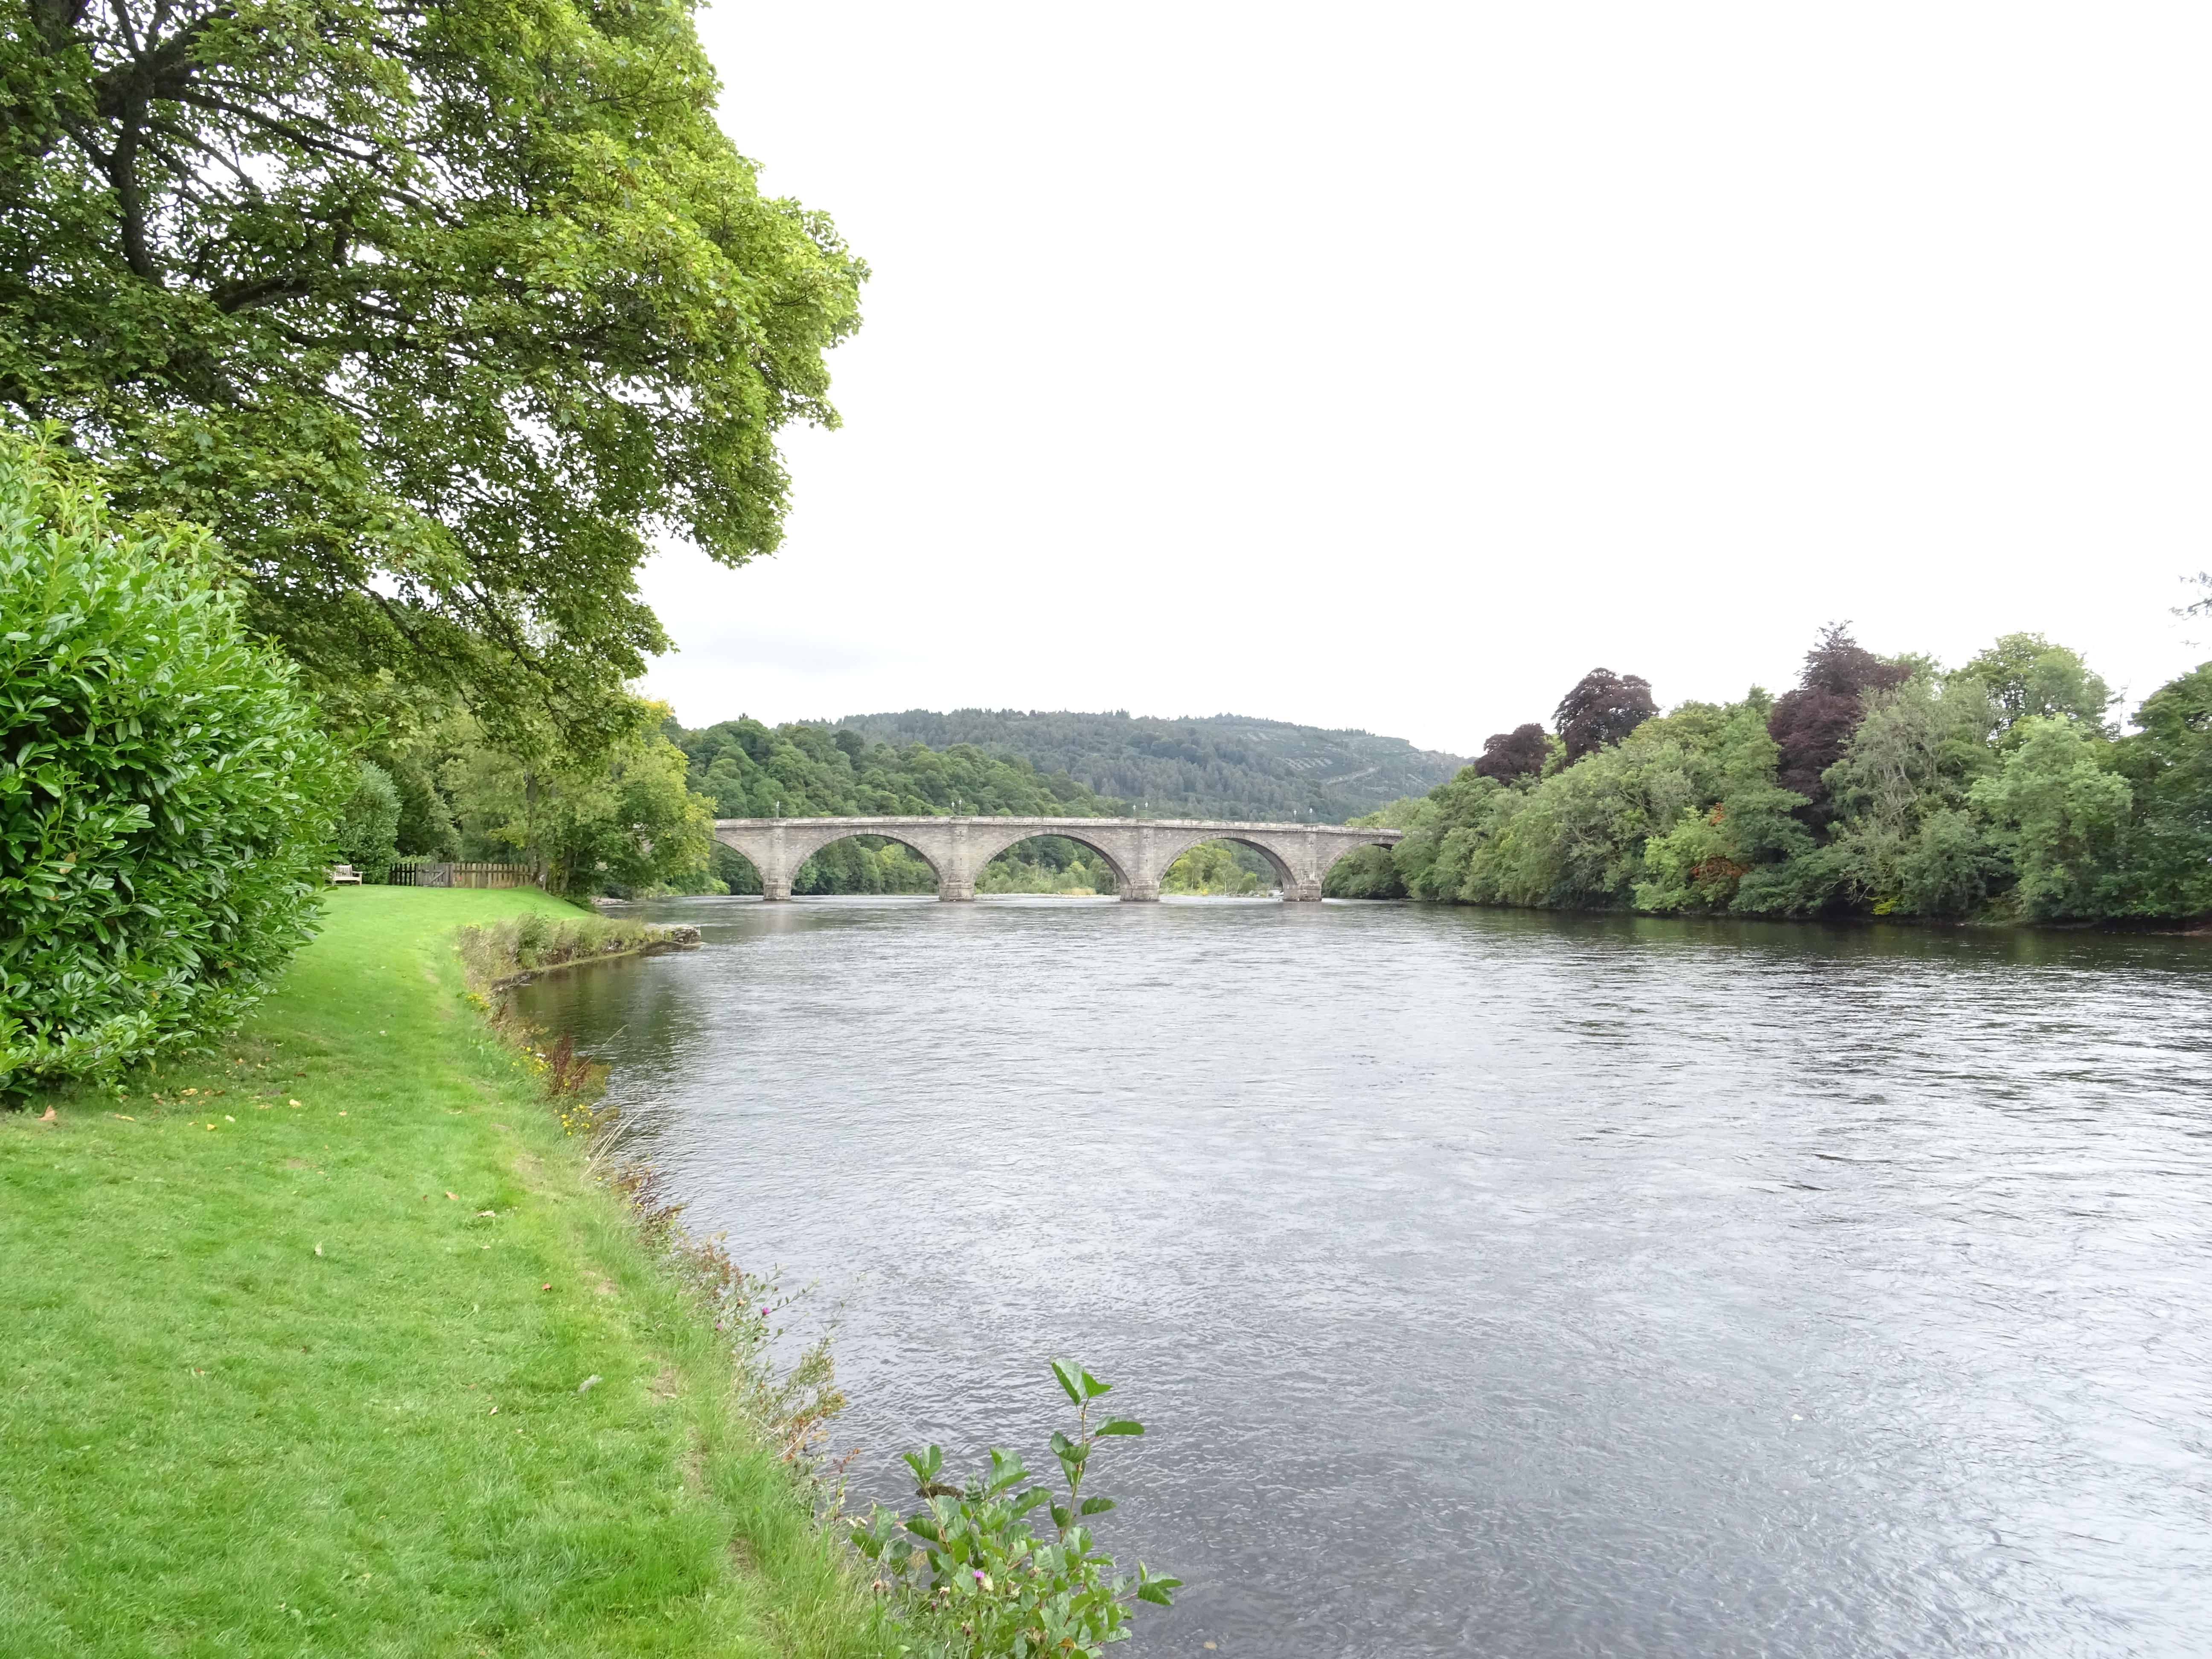 The River Tay at Dunkeld - Tours of Scotland